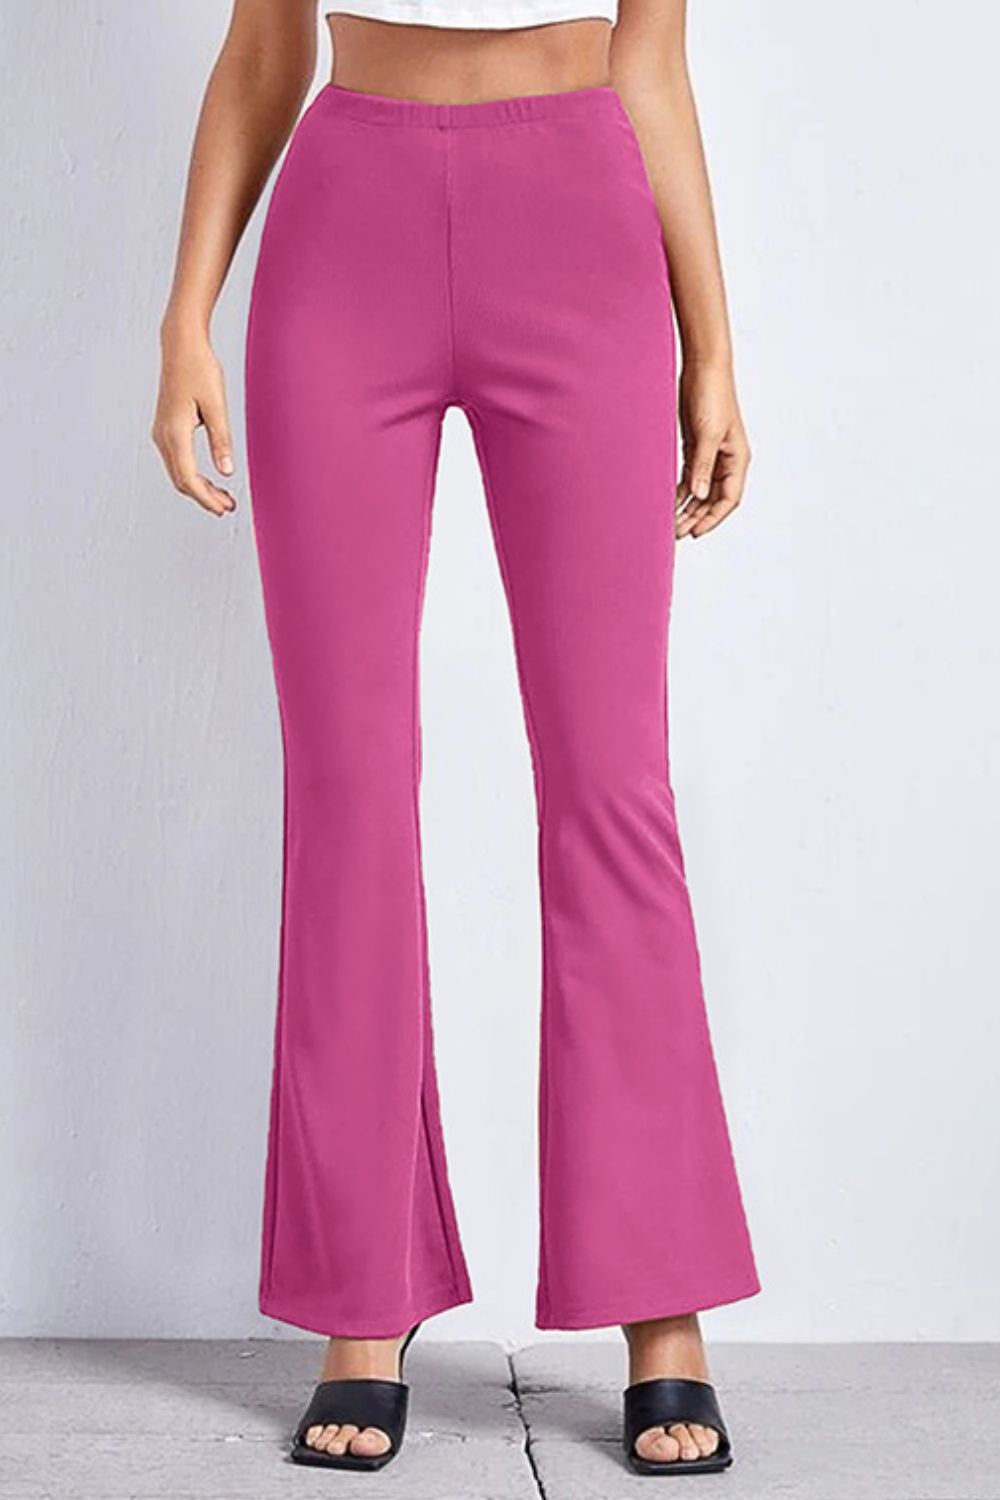 High Rise Flare Pants - Pink / M - Bottoms - Pants - 5 - 2024